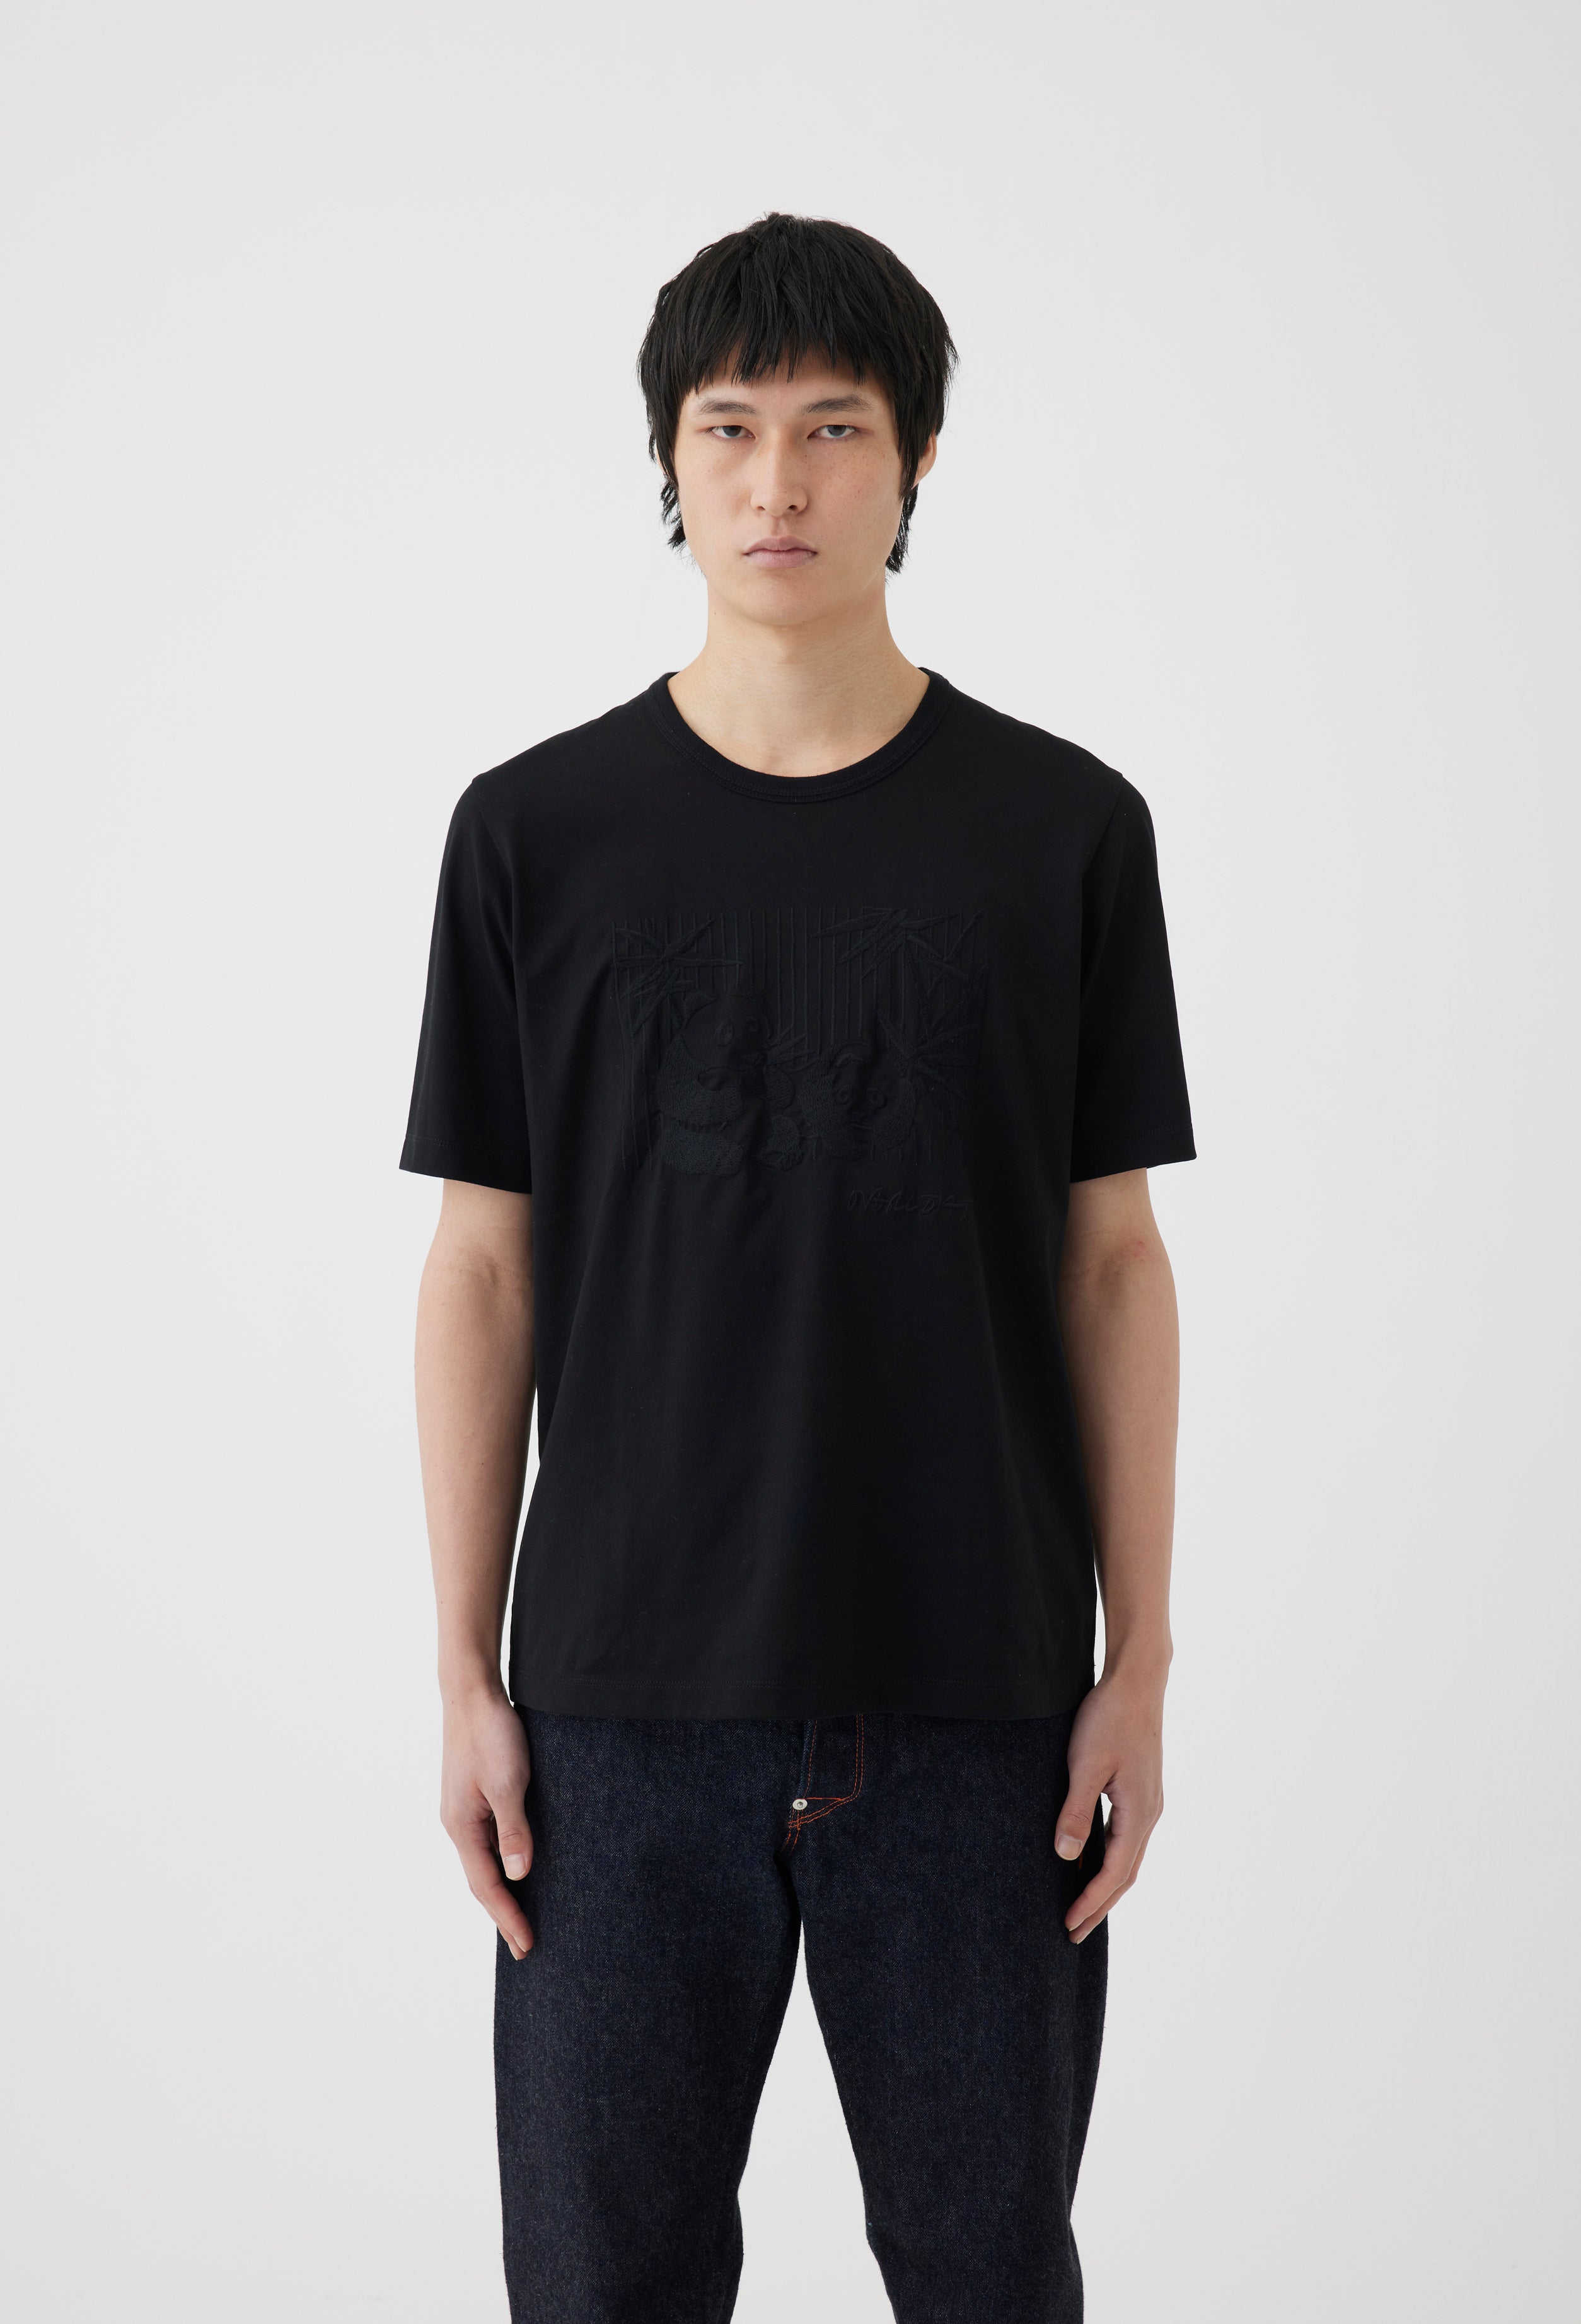 Embroidered Panda T-shirt in Black